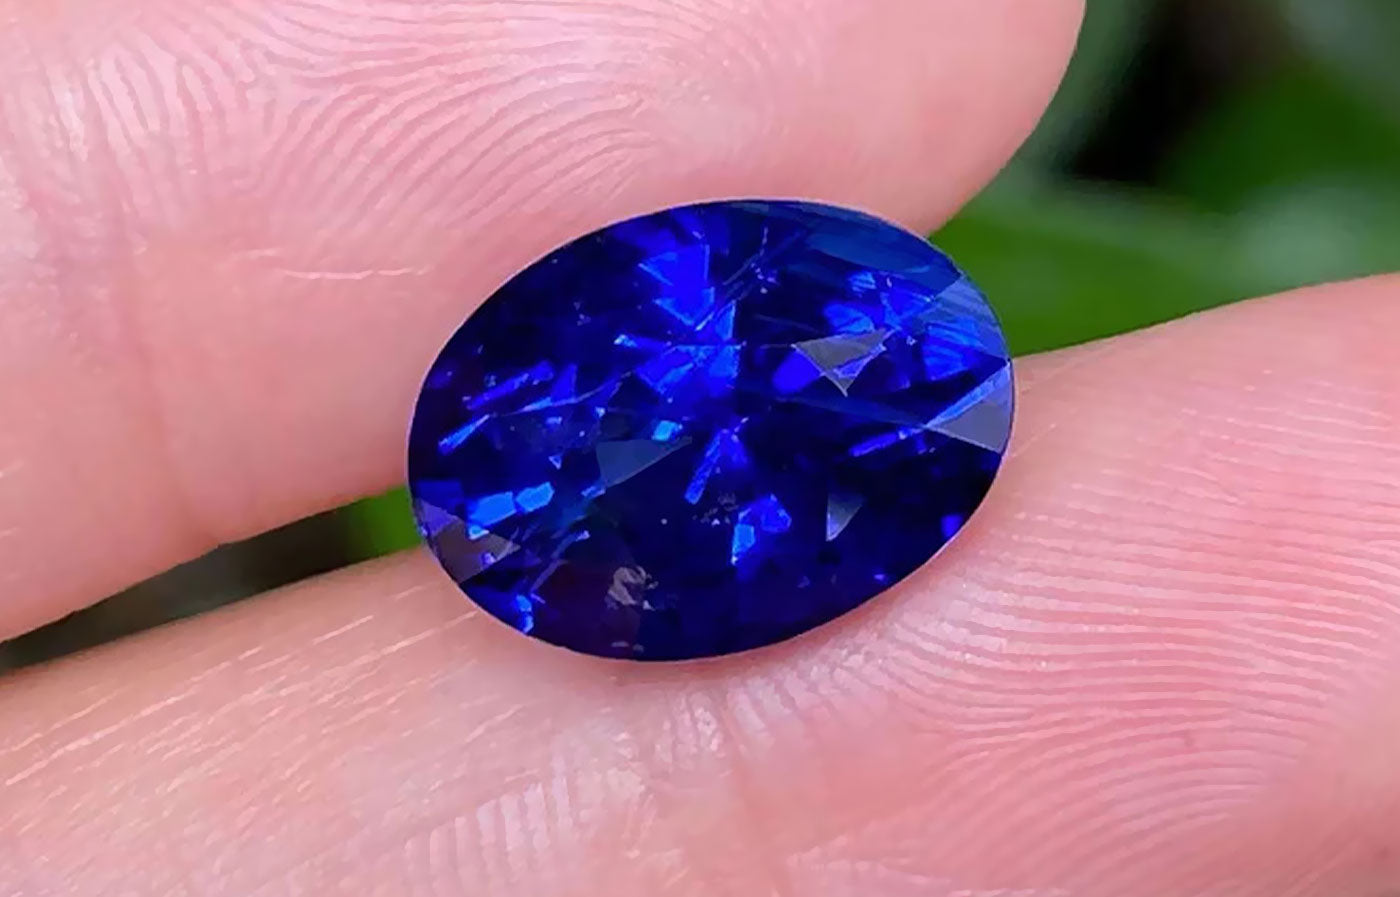 Gorgeous Blue Sapphire between fingers - From the Earth to Your Jewelry Box - The Story of Virgo's September Birthstone - Saratti 